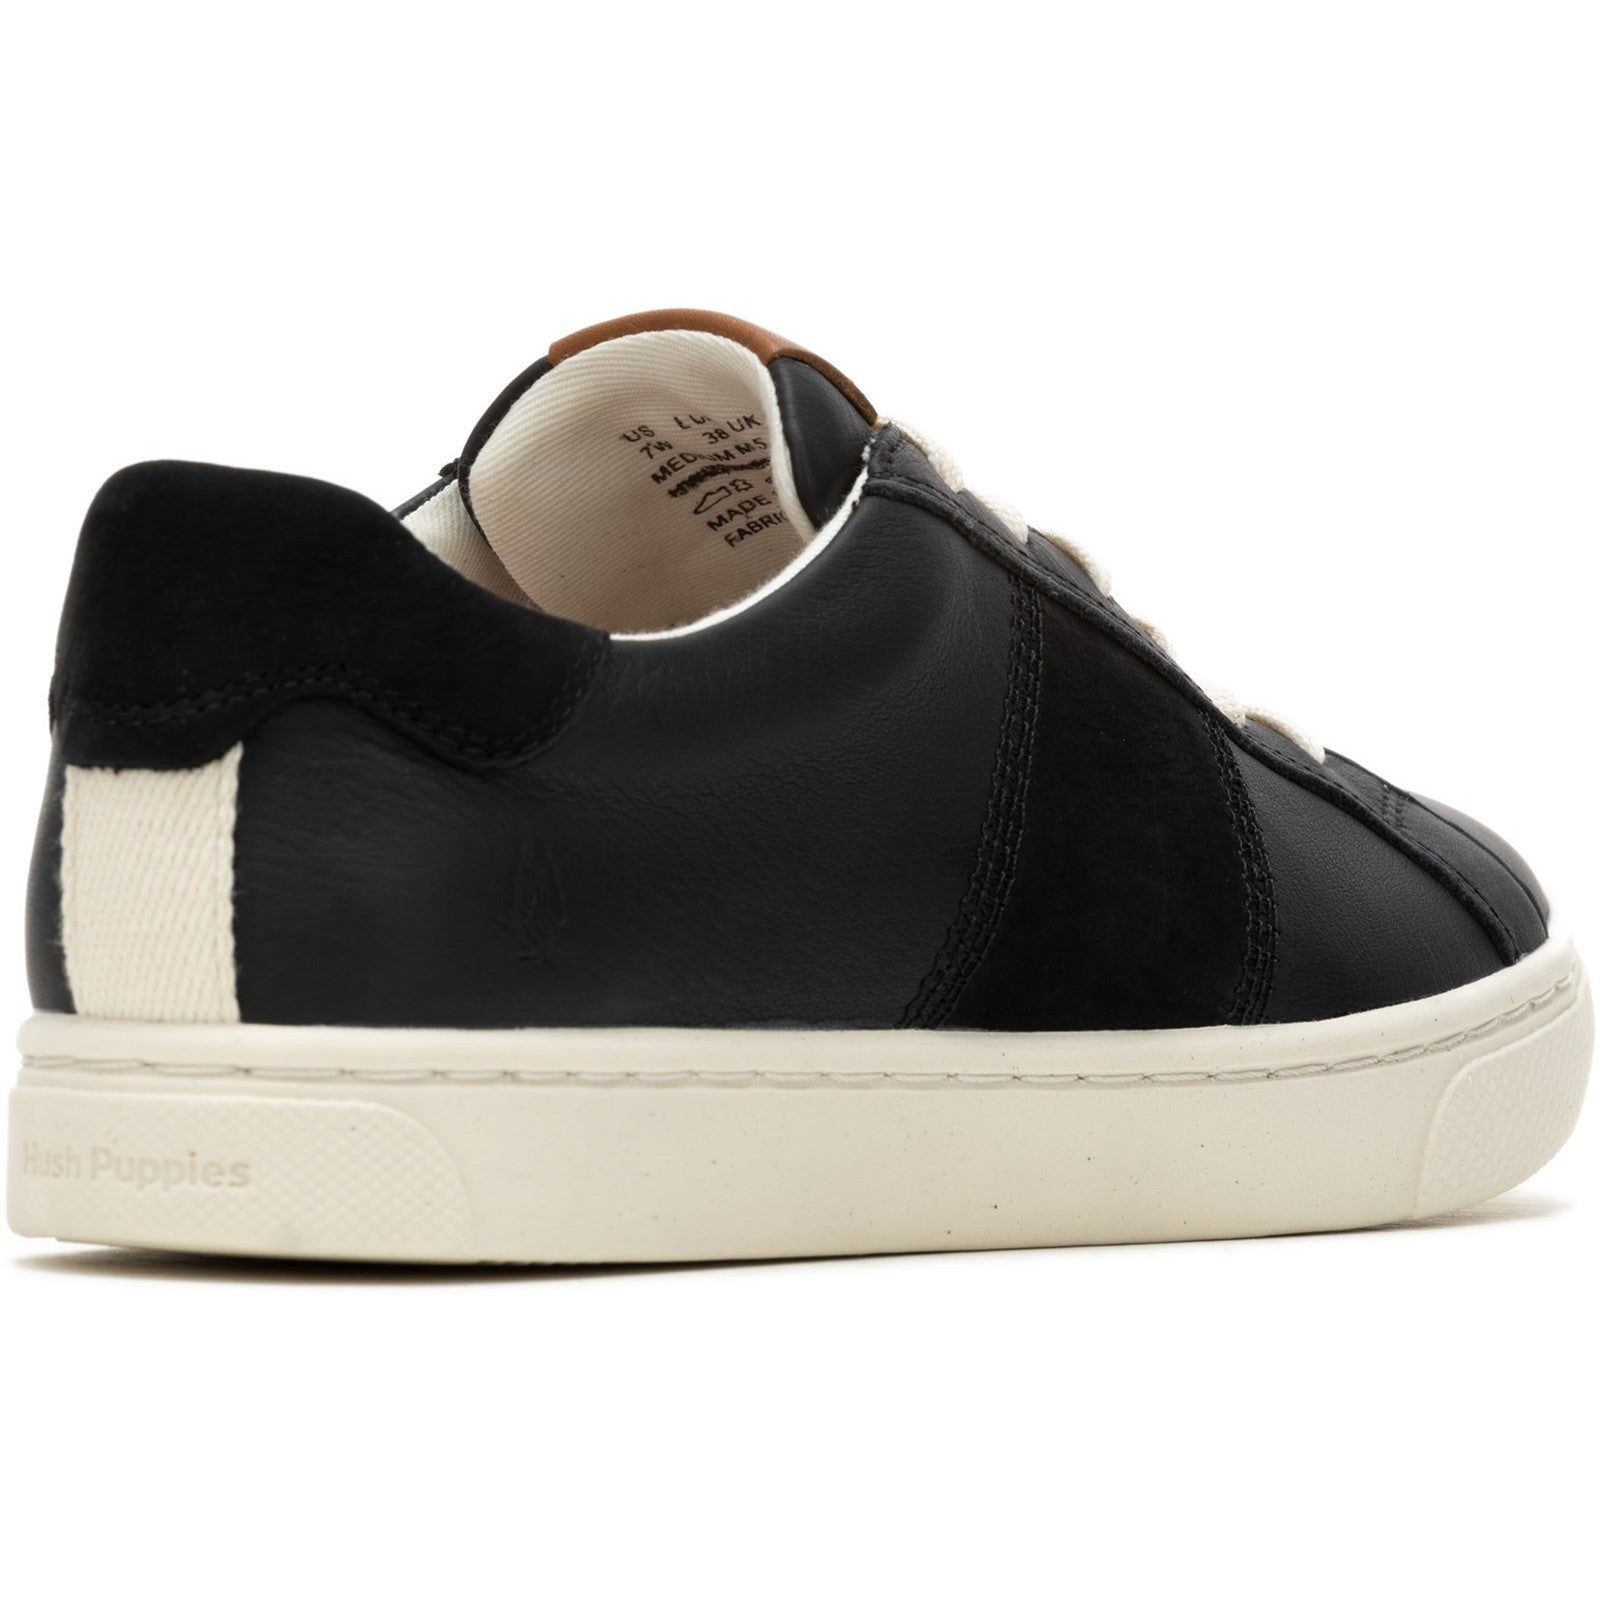 Hush Puppies Womens The Good Trainers - Black